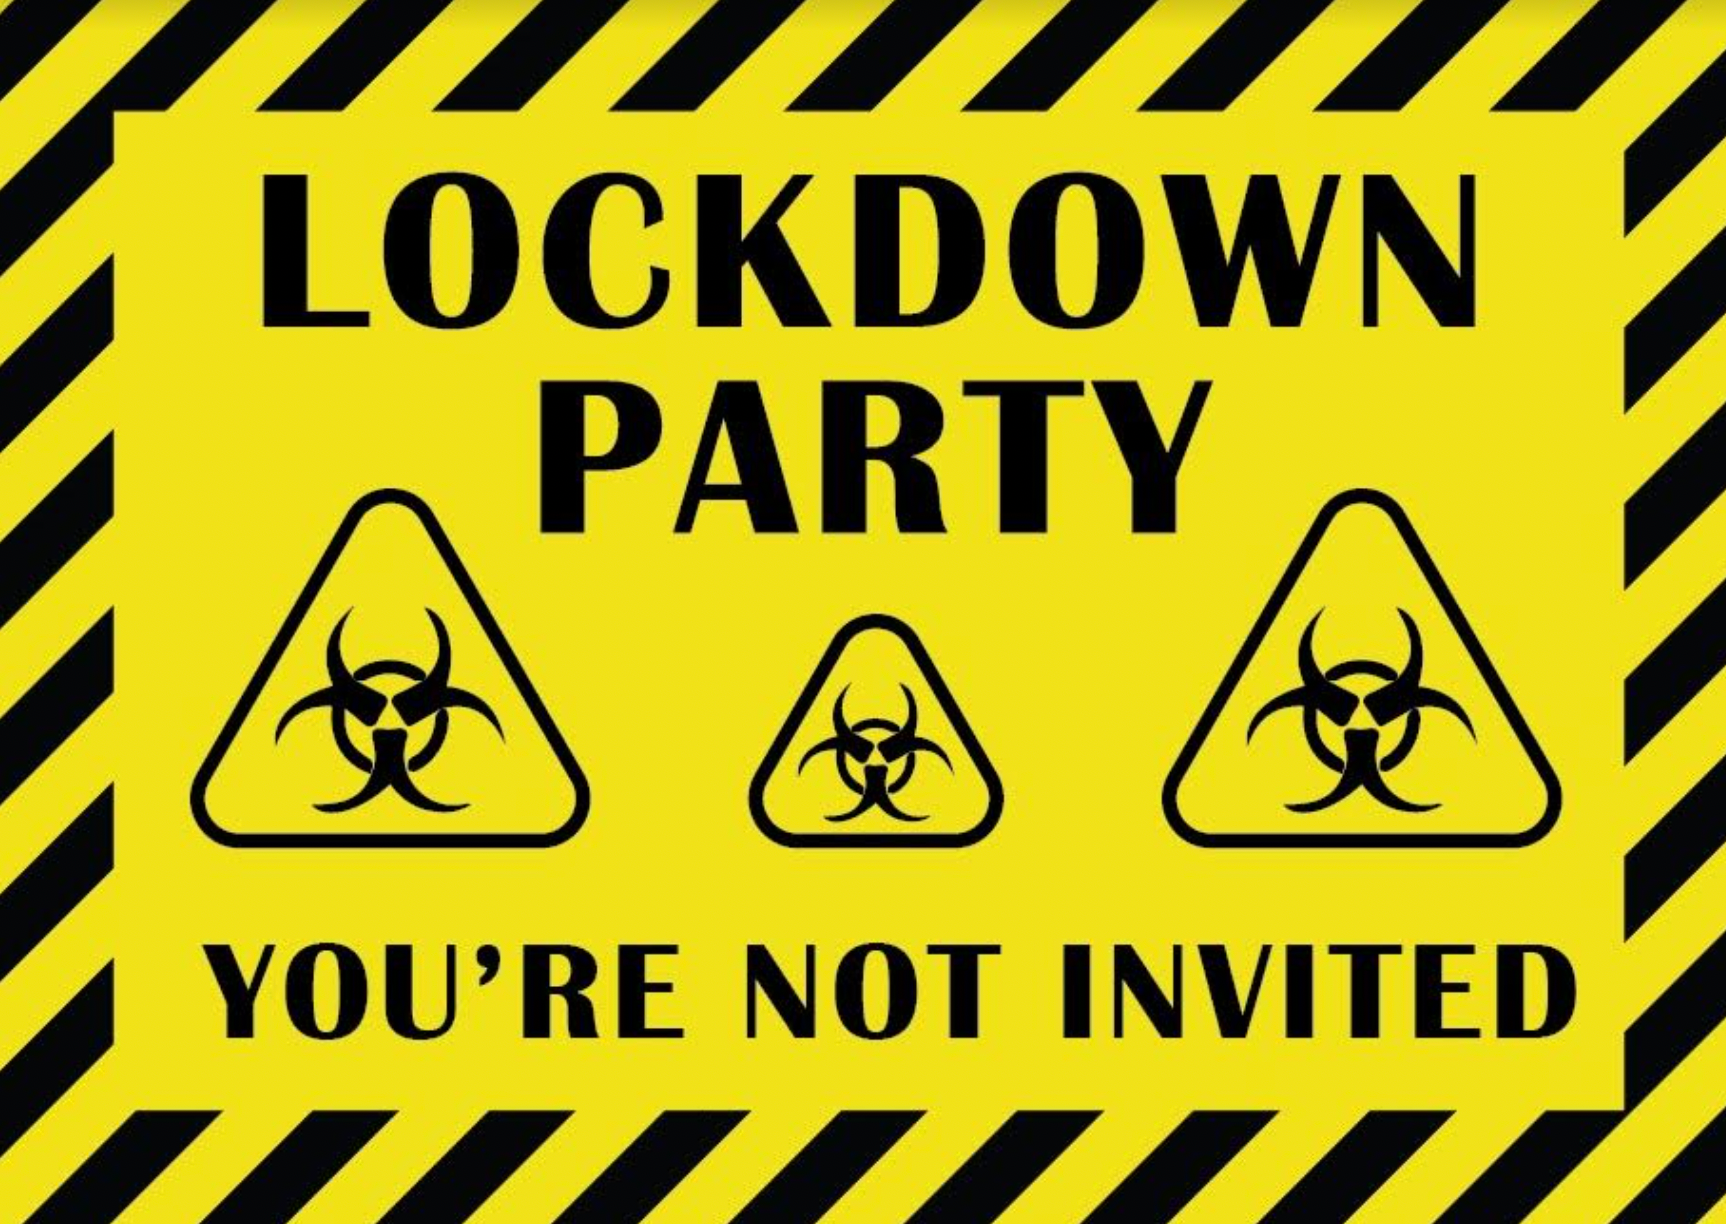 Lockdown party poster